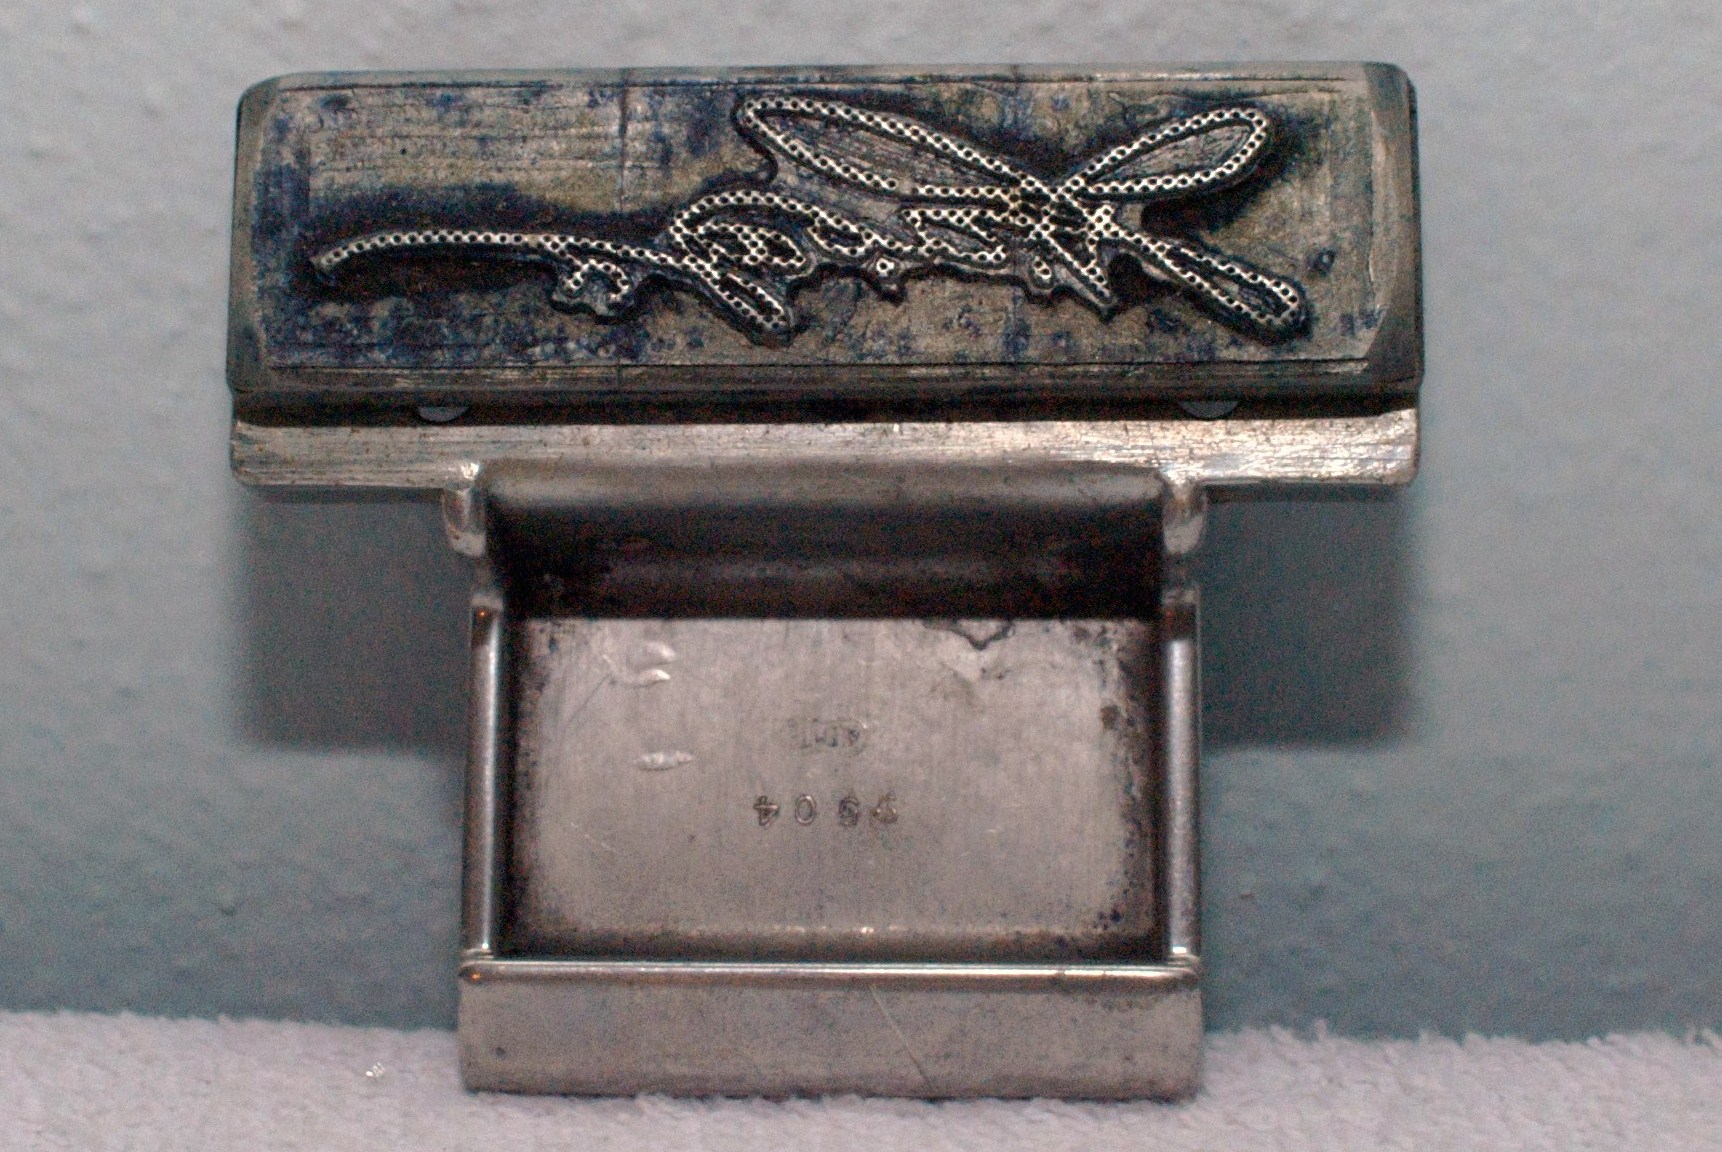 Henry A. Page metal signature stamp